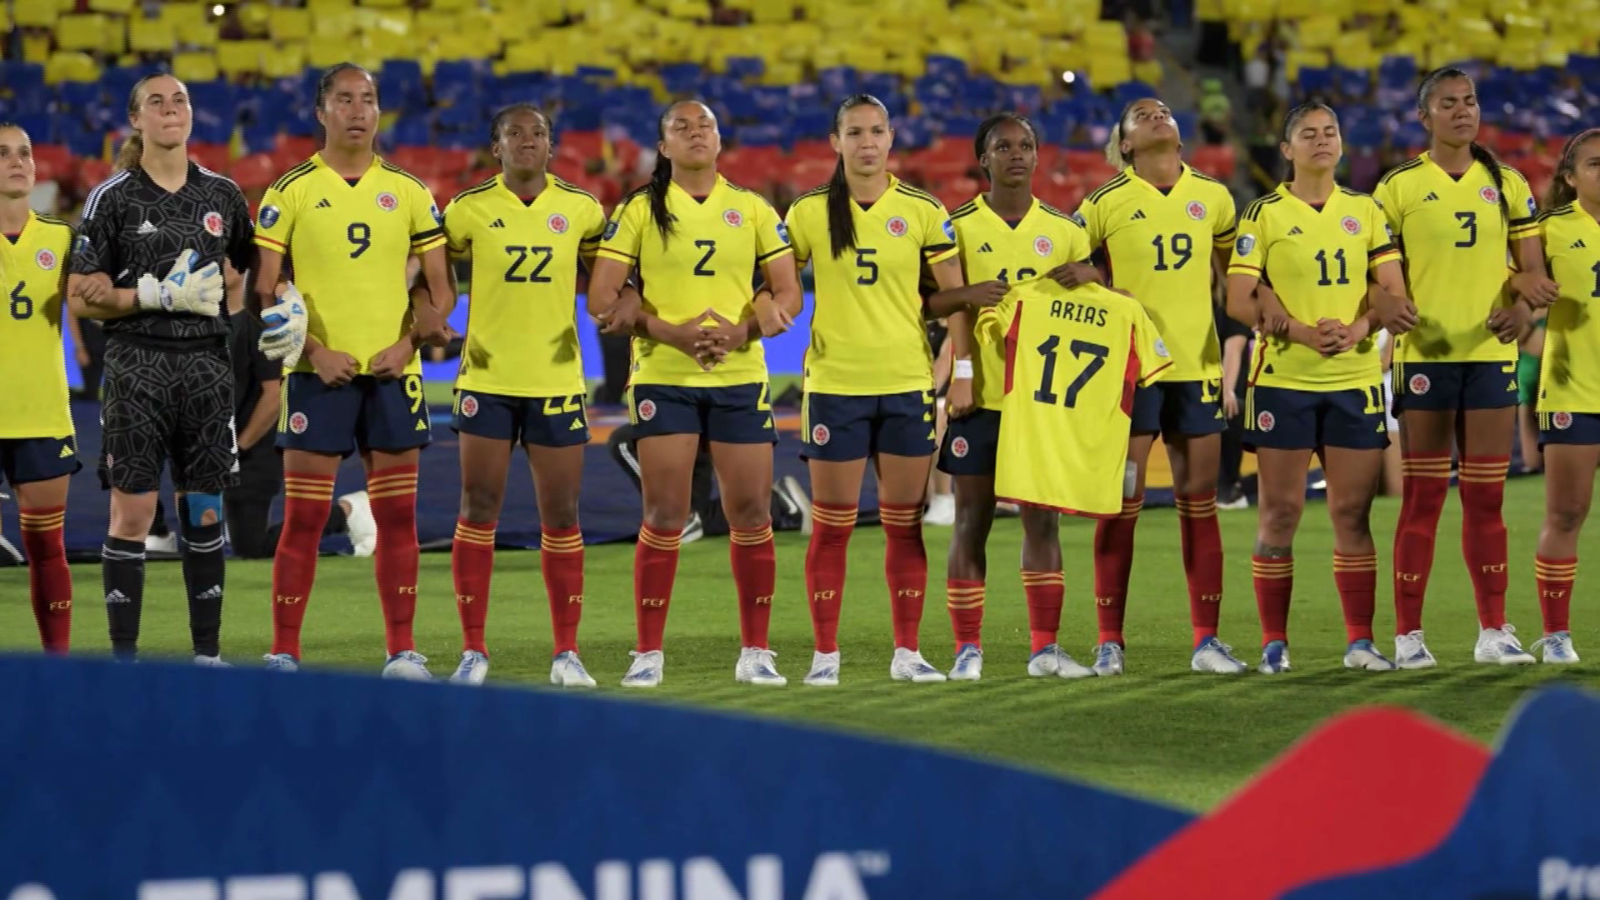 Colombian women's team fills their country with pride The Limited Times